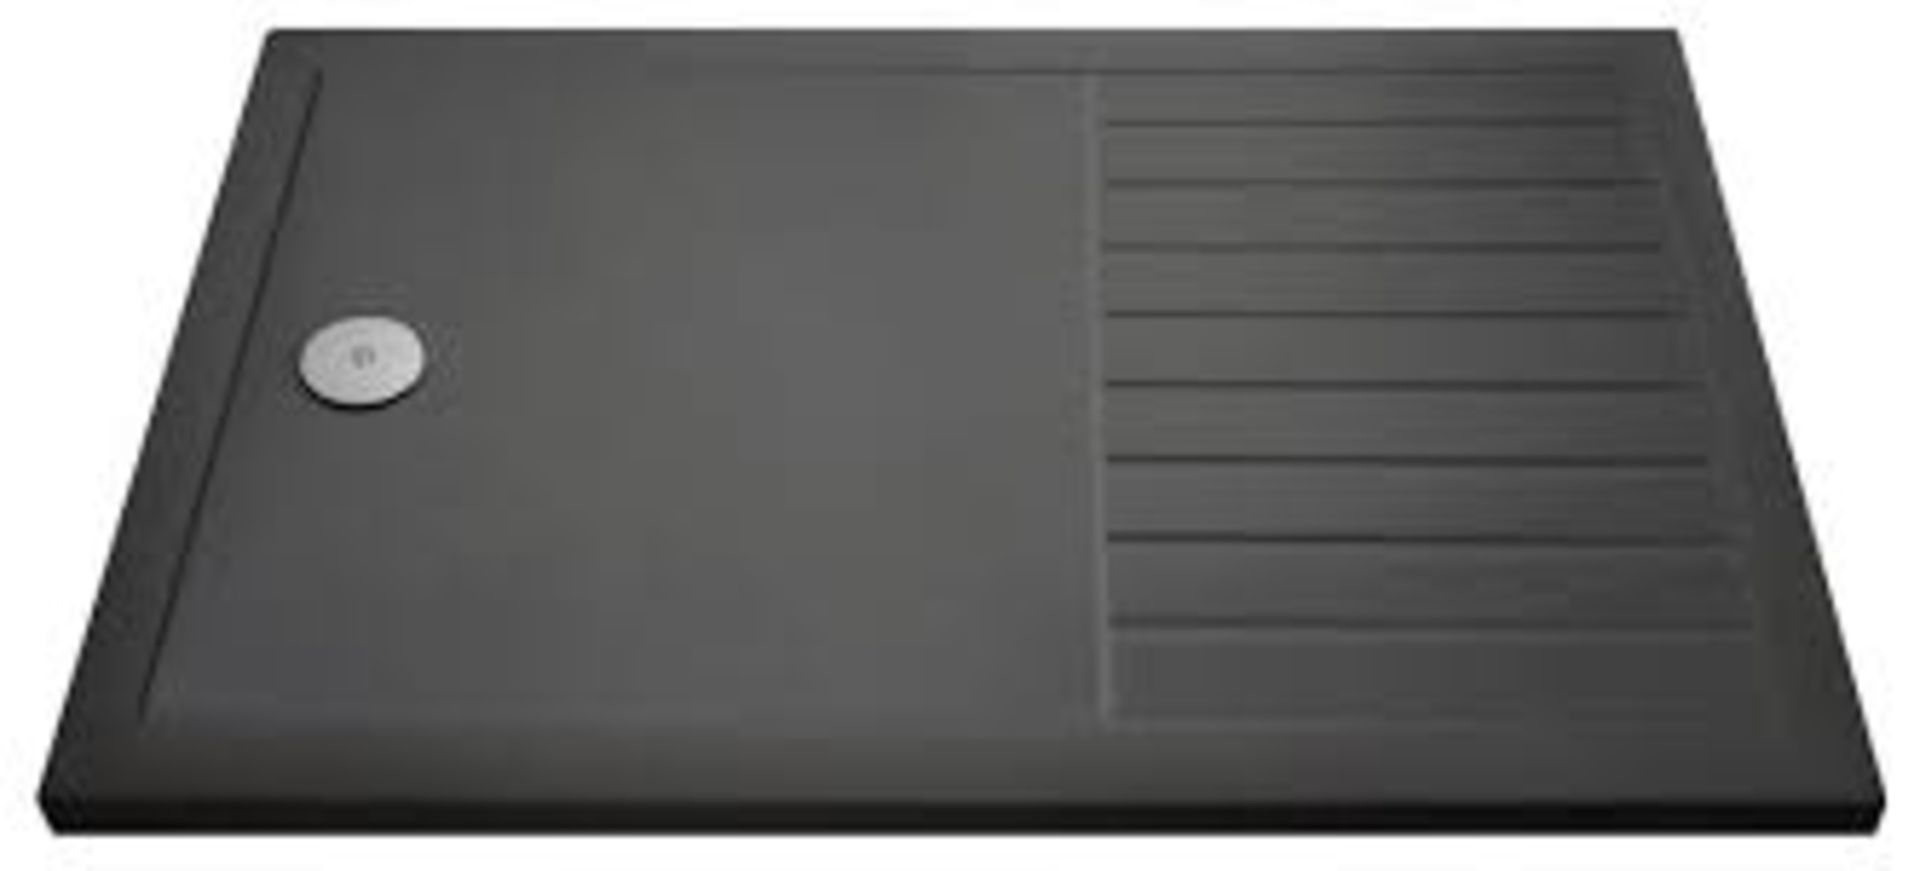 1400mm x 900mm x 40mm Anthracite Grey Non Slip Walk In Shower Tray RRP £220 (16201) (Public